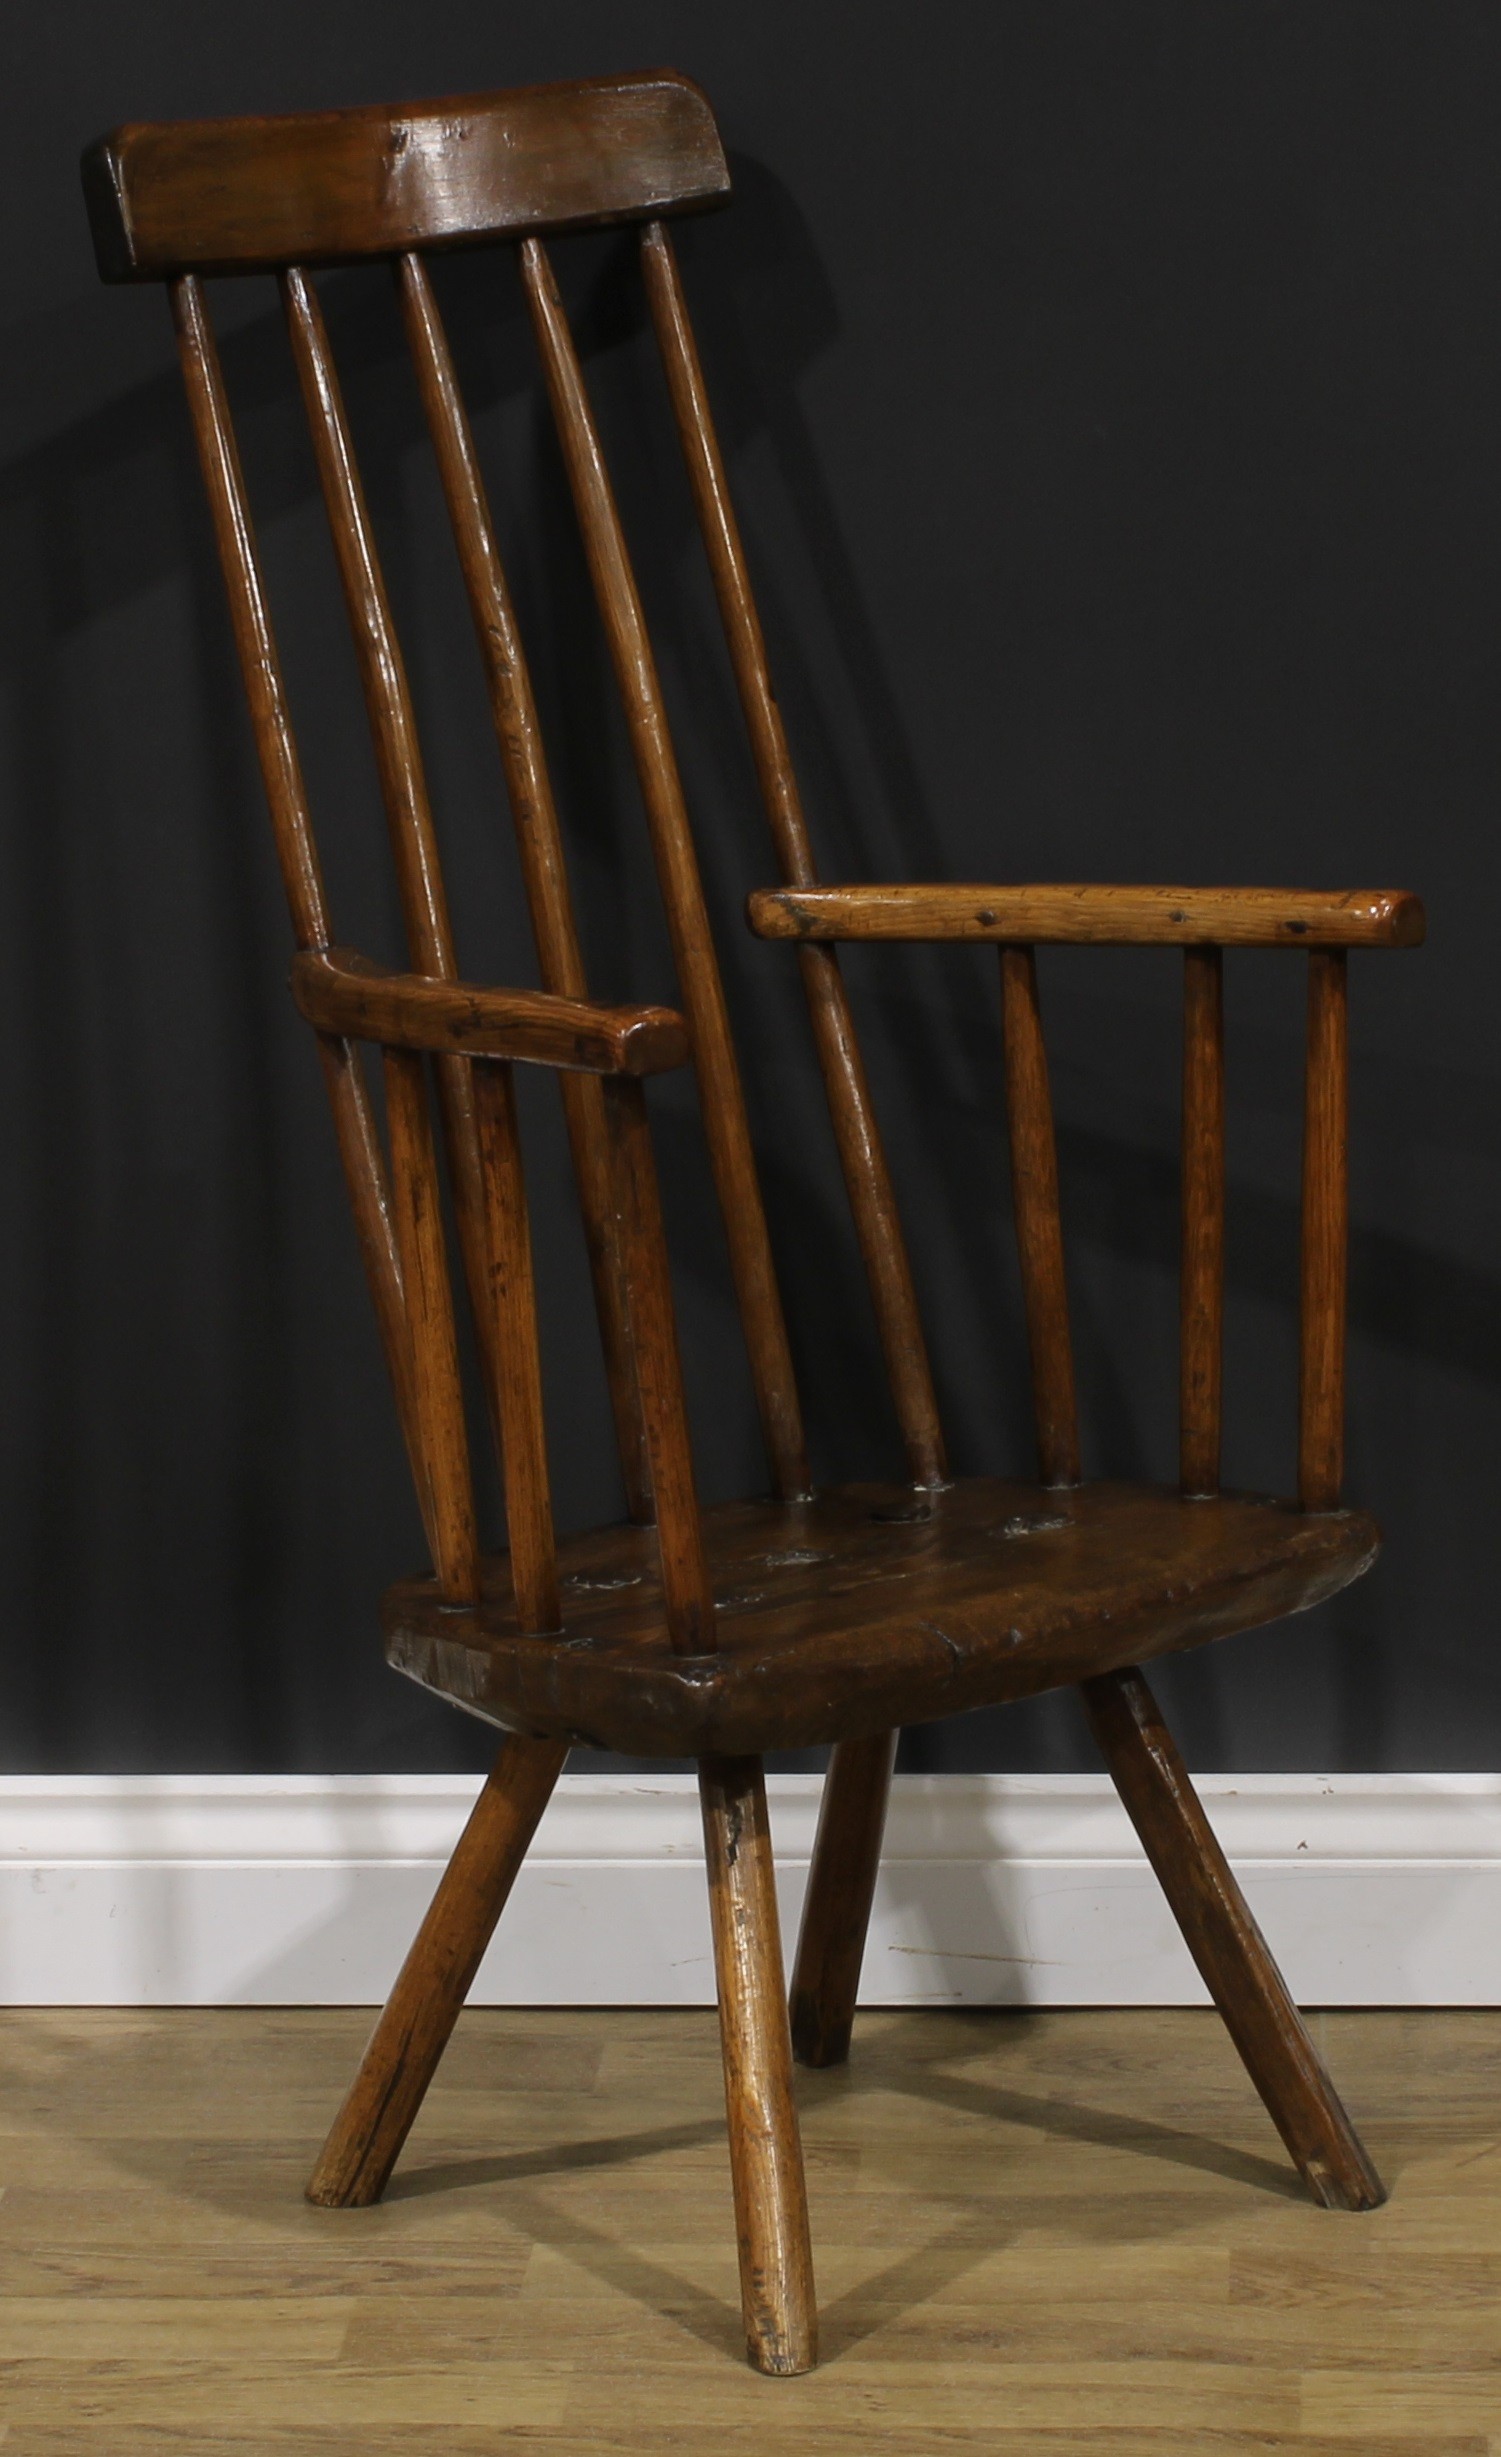 A 19th century Irish ash and elm primary hedge or famine chair, of traditional vernacular form, 99cm - Image 2 of 4